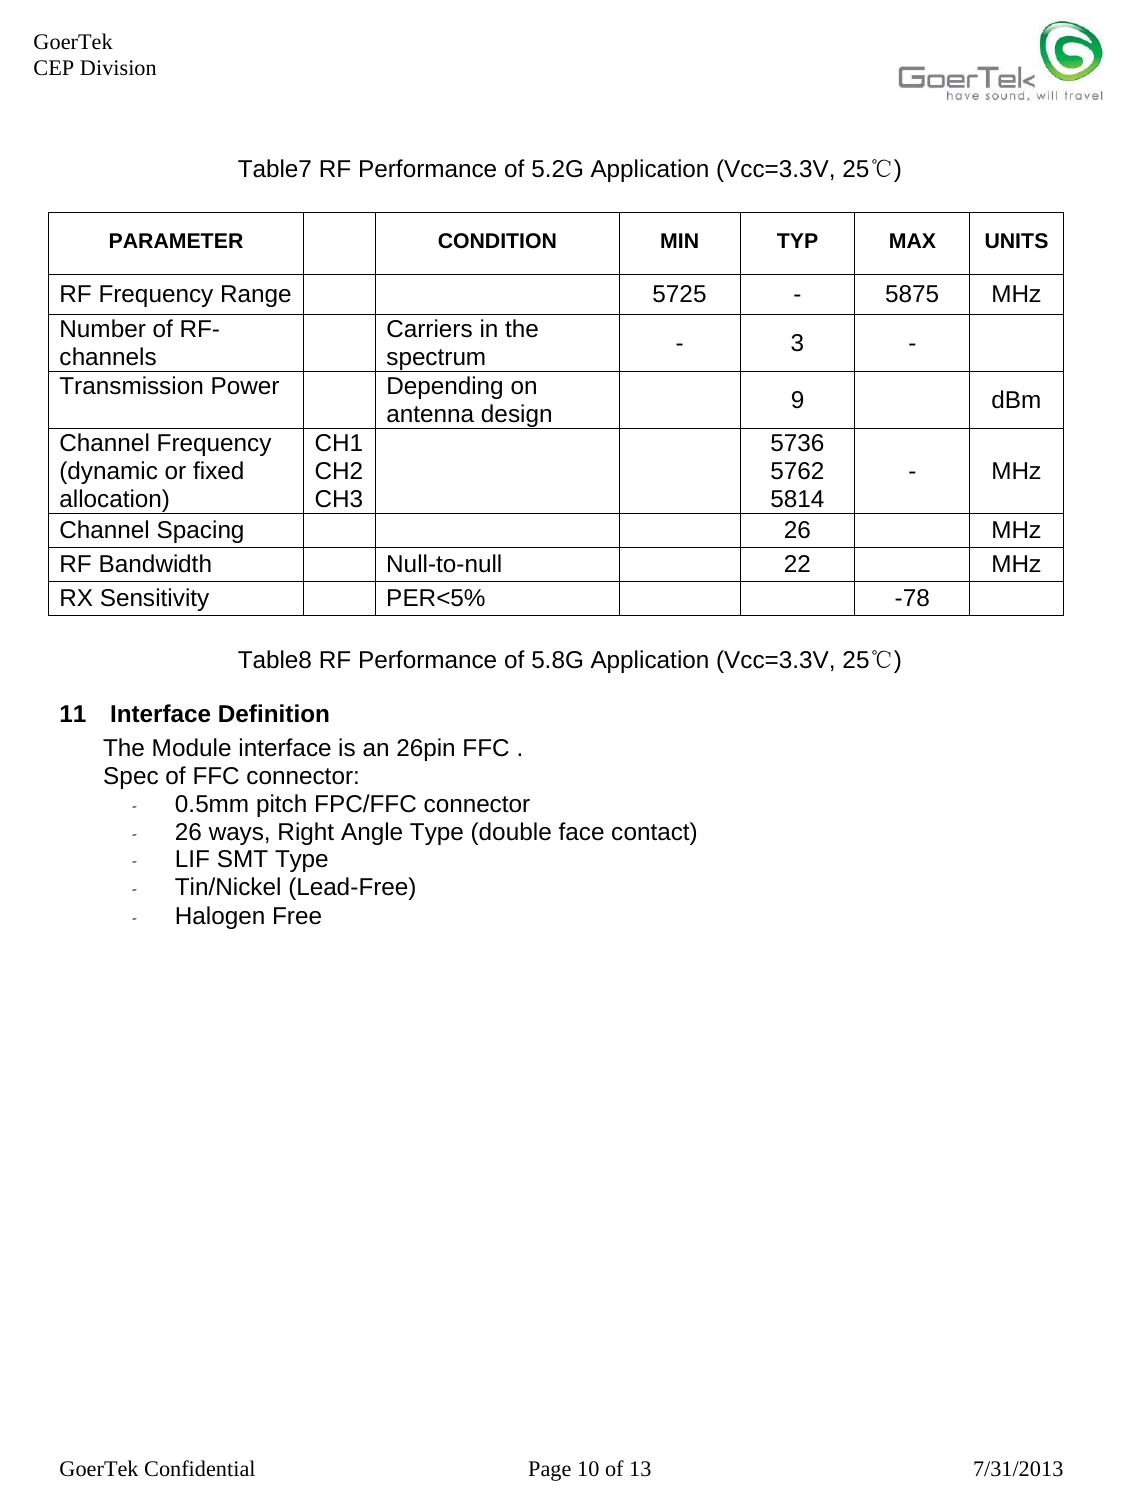     GoerTek Confidential  Page 10 of 13  7/31/2013 GoerTek  CEP Division Table7 RF Performance of 5.2G Application (Vcc=3.3V, 25℃)  PARAMETER  CONDITION  MIN TYP MAX UNITS RF Frequency Range      5725  -  5875  MHz Number of RF-channels   Carriers in the spectrum  - 3 -  Transmission Power    Depending on antenna design   9  dBm Channel Frequency (dynamic or fixed allocation) CH1 CH2 CH3    5736 5762 5814  - MHz Channel Spacing        26    MHz RF Bandwidth    Null-to-null    22    MHz RX Sensitivity    PER&lt;5%      -78    Table8 RF Performance of 5.8G Application (Vcc=3.3V, 25℃) 11  Interface Definition The Module interface is an 26pin FFC .  Spec of FFC connector: -  0.5mm pitch FPC/FFC connector -  26 ways, Right Angle Type (double face contact) -  LIF SMT Type - Tin/Nickel (Lead-Free) - Halogen Free   